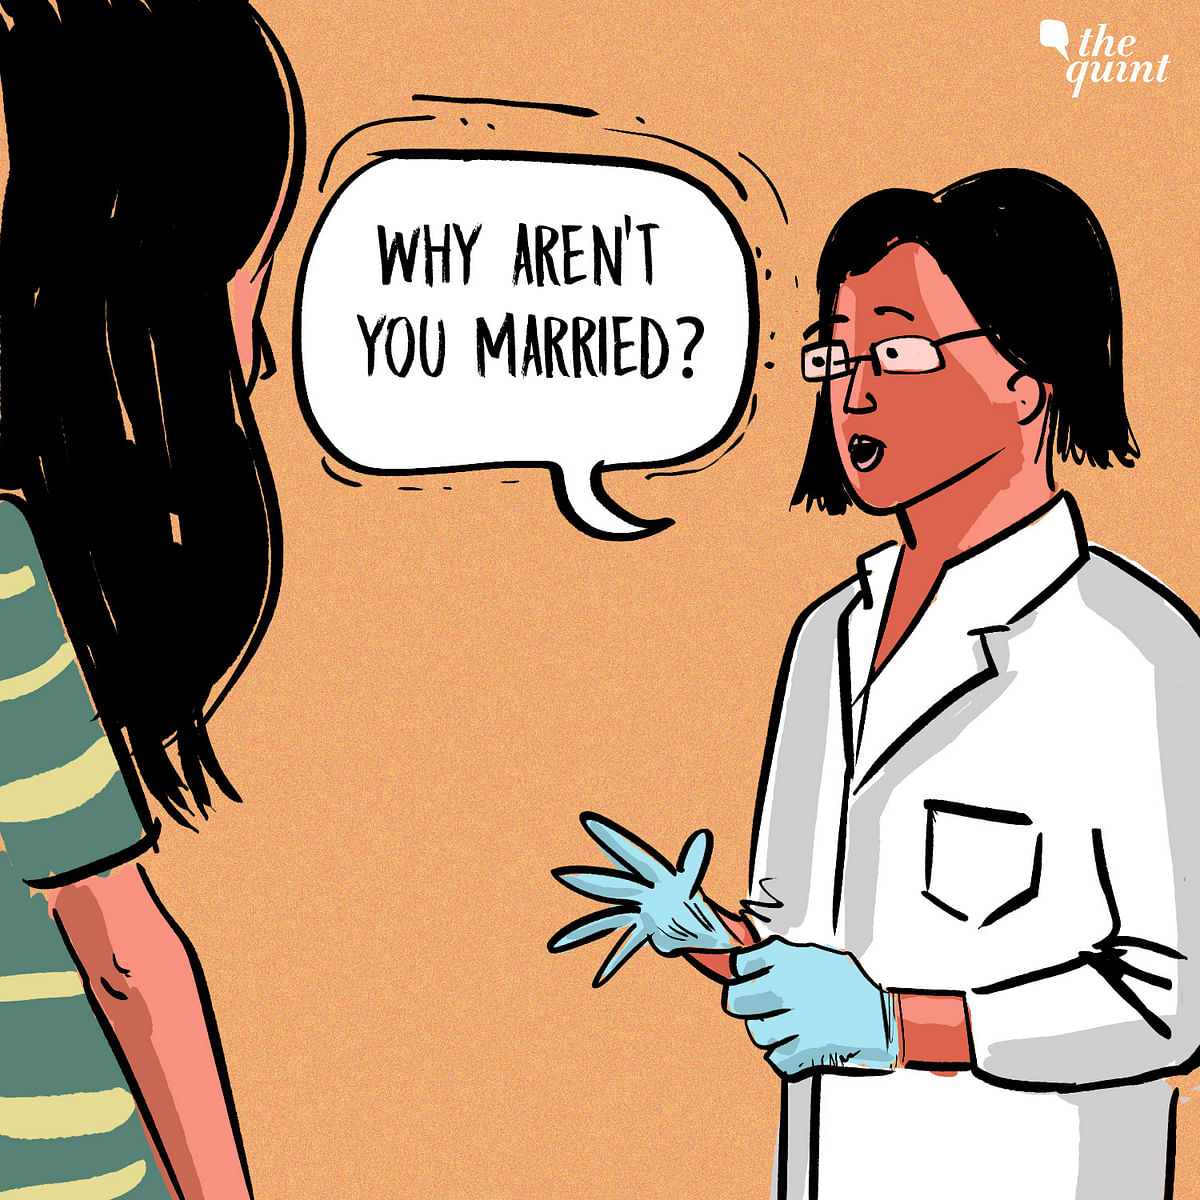 Even for basic tests, women must hold up their marital status. Often, they're denied services if they're unmarried.